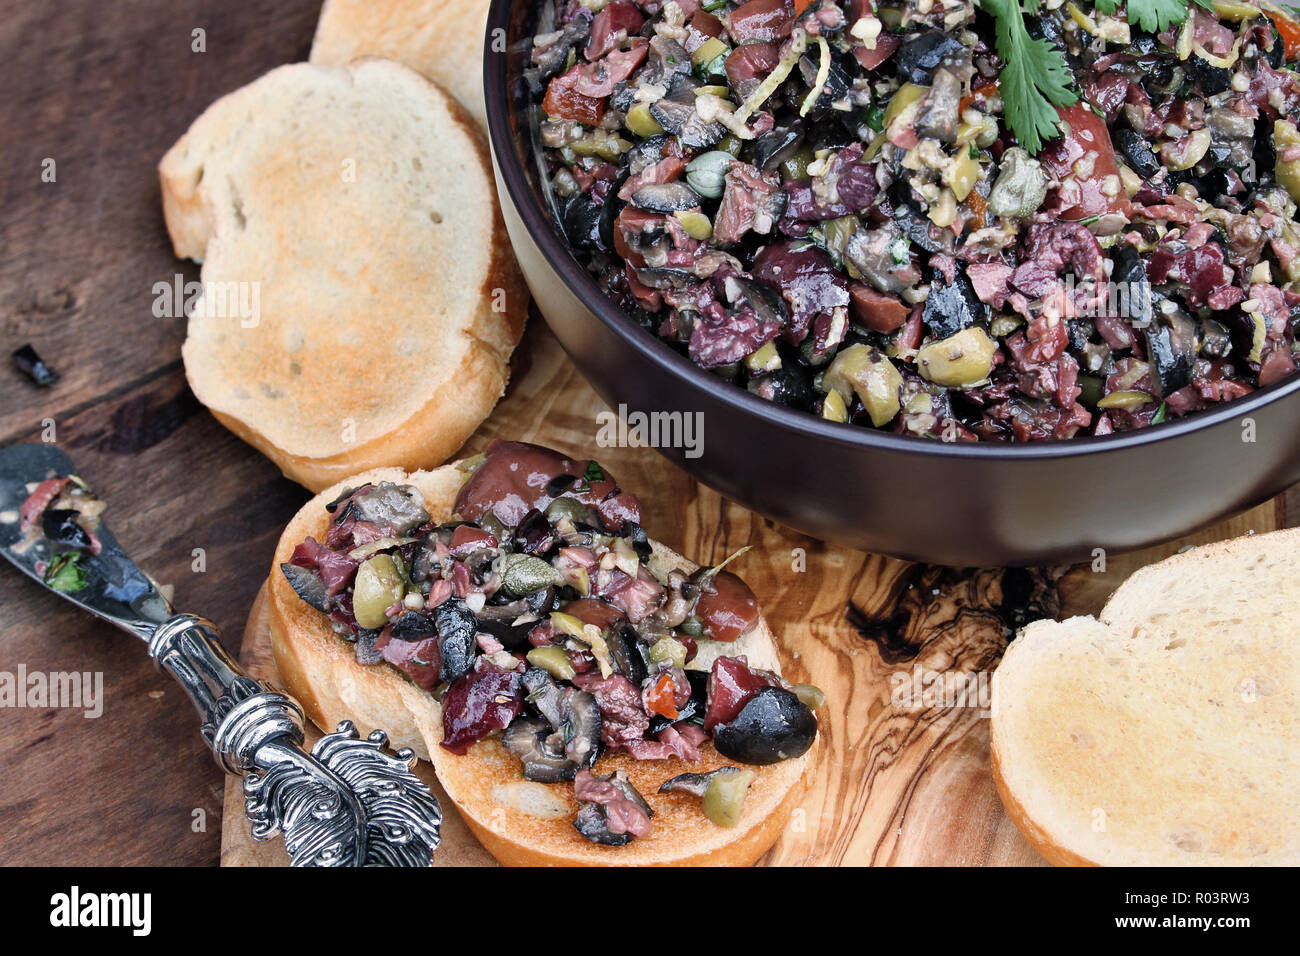 Homemade mixed Olive Tapenade made with garlic, capers, olive oil, Kalamata, black and green olives spread over toasted bread. Image shot from above. Stock Photo